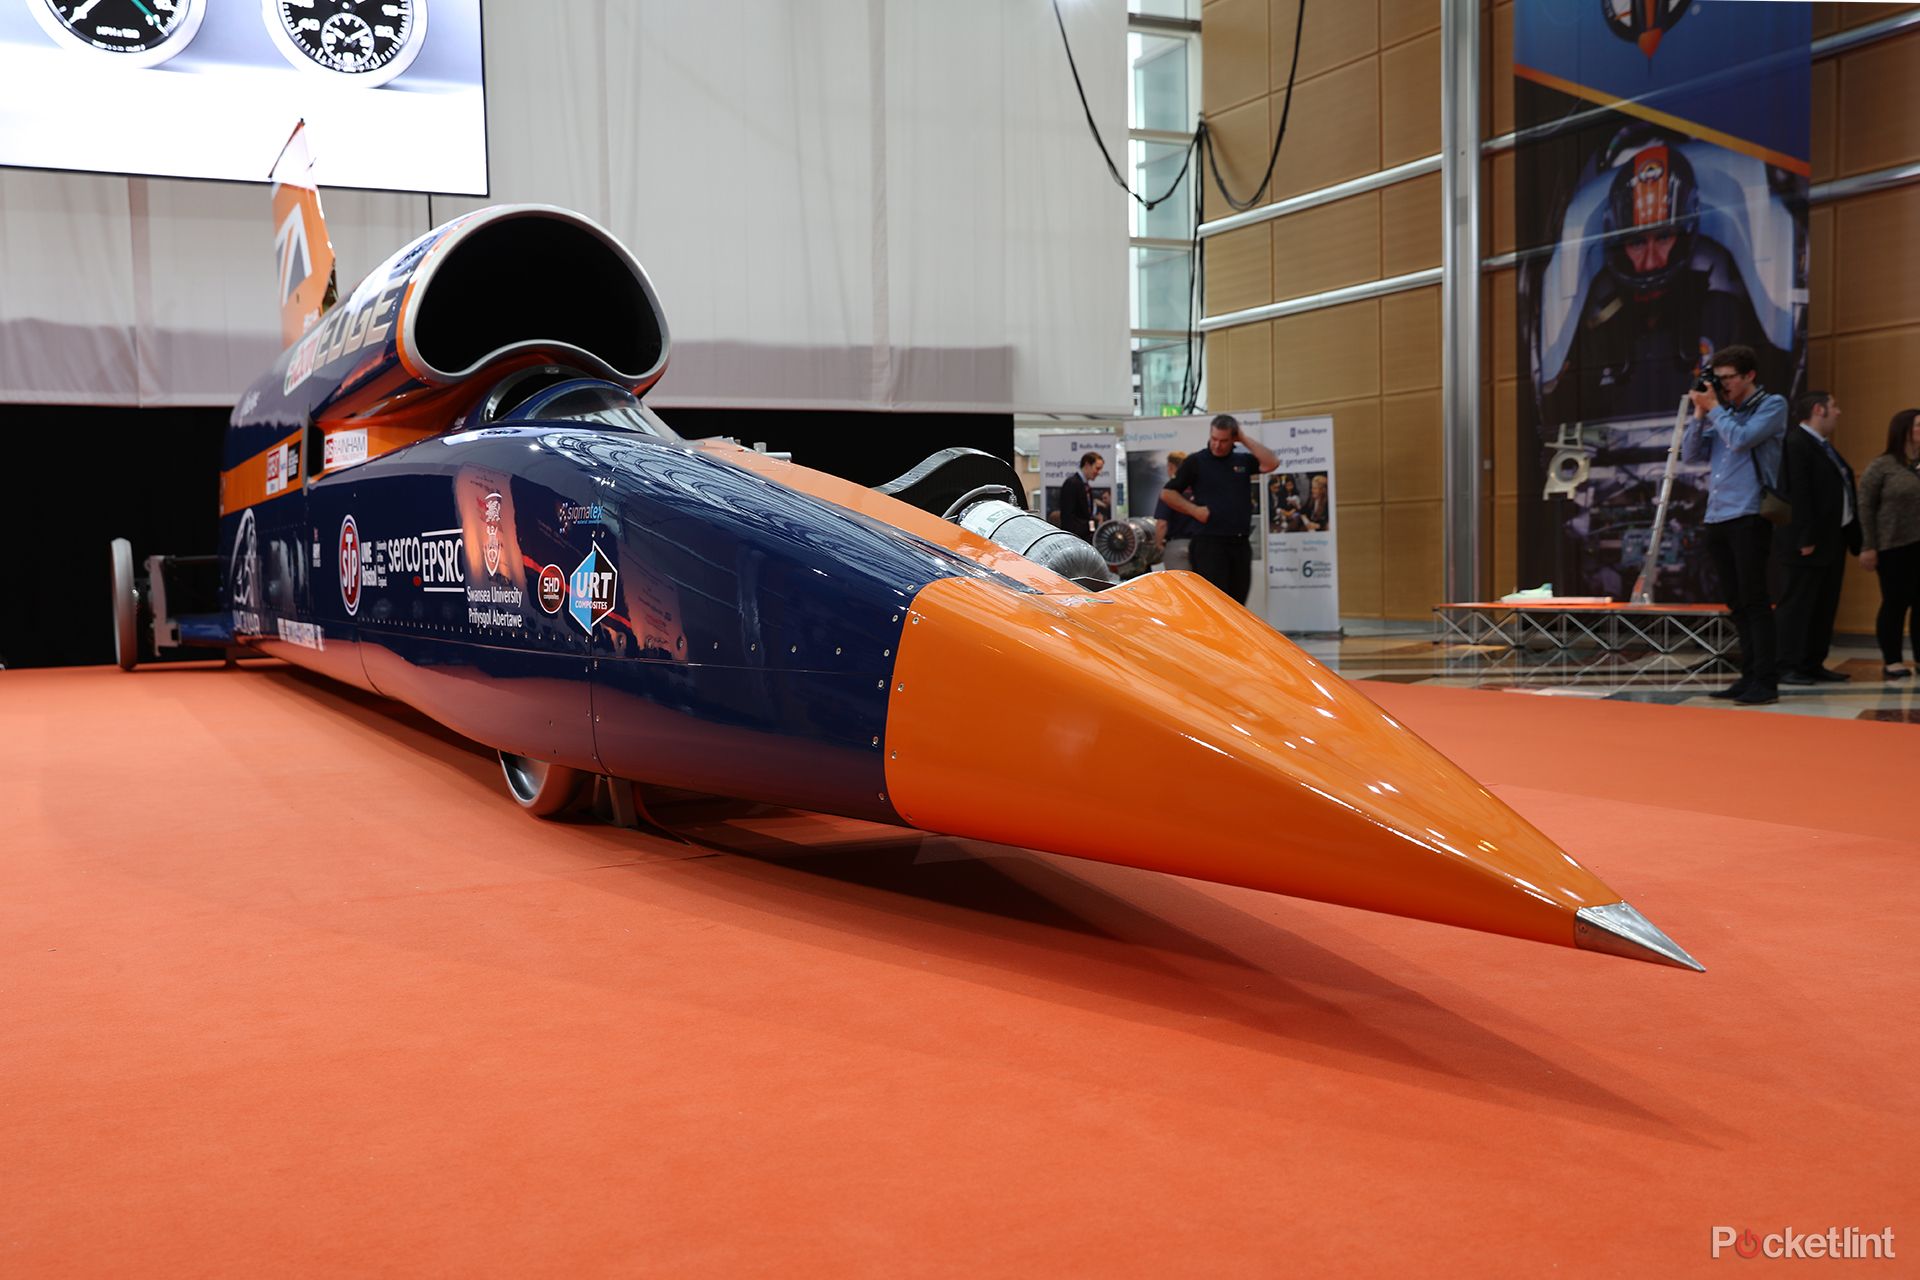 bloodhound supersonic car in pictures the 1 000mph british record breaker shown in london image 1